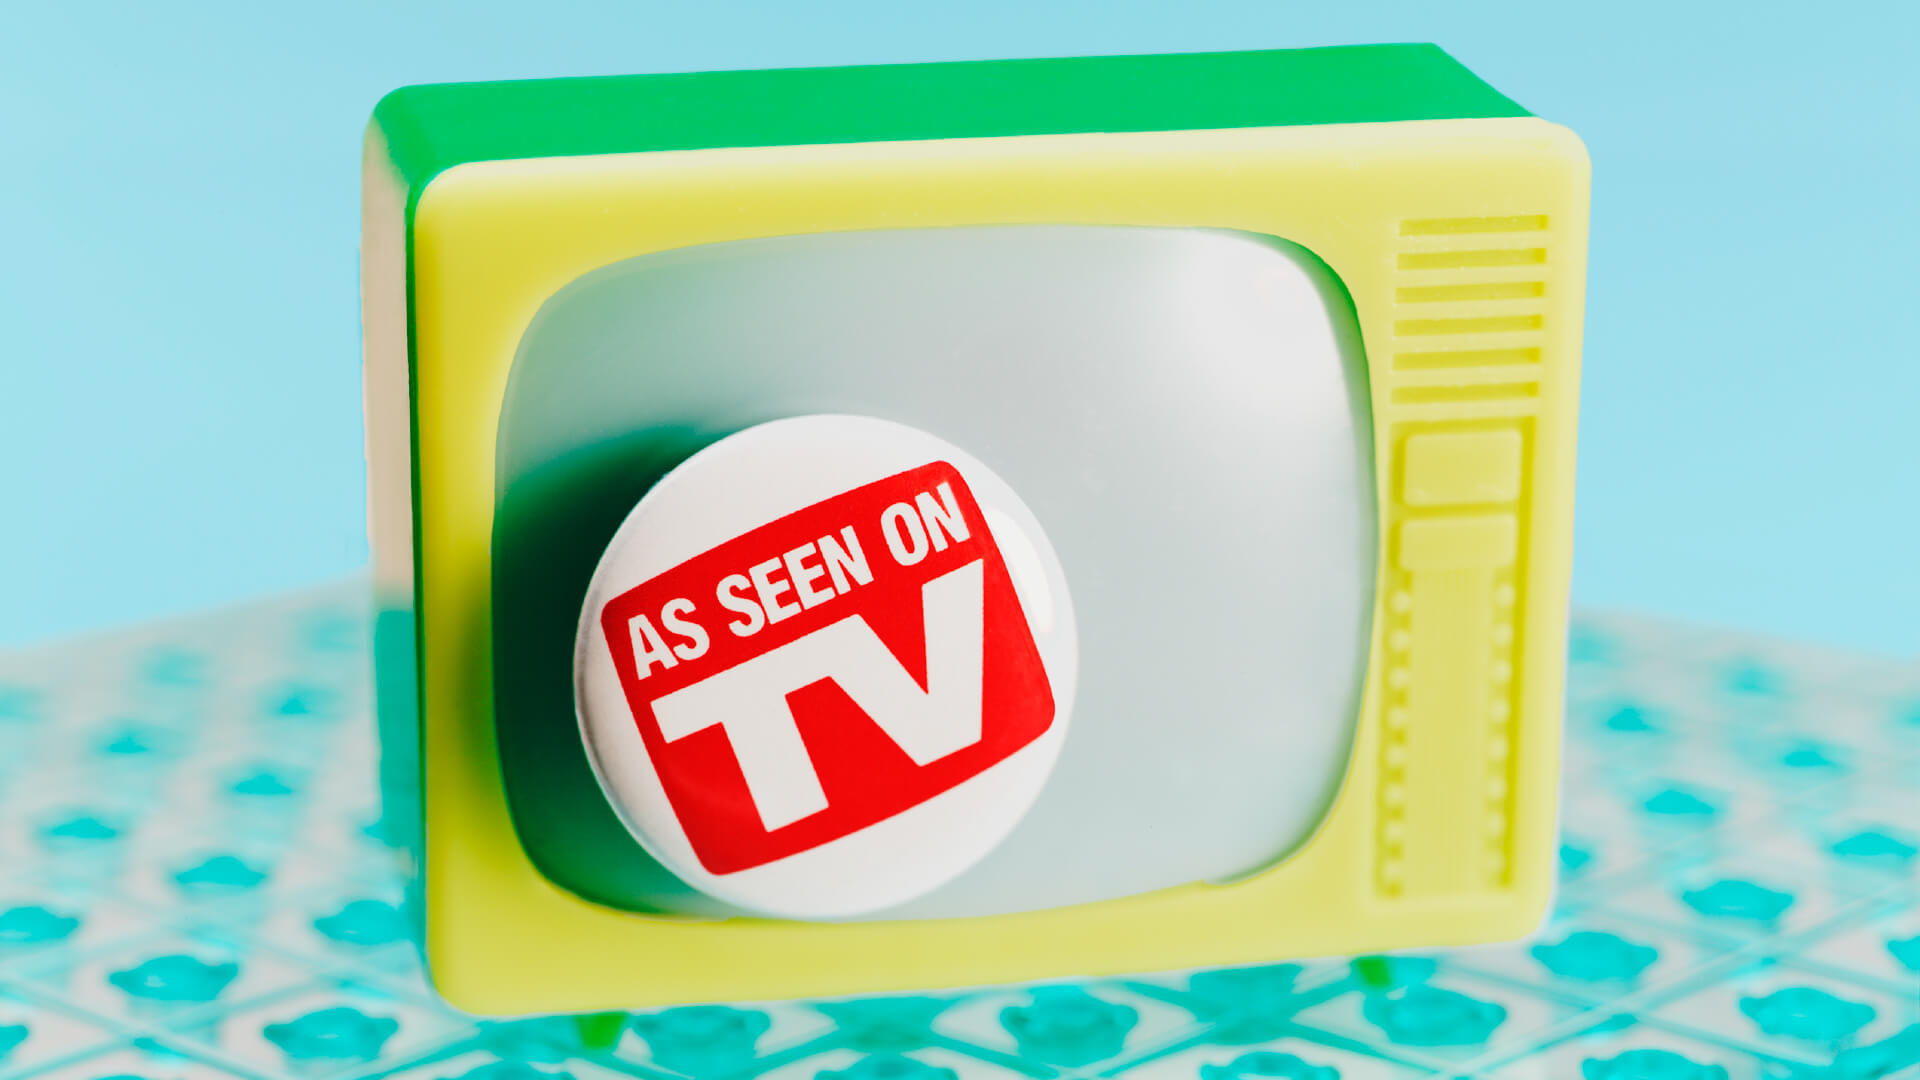 15 'As Seen on TV' Products You Should Actually Buy